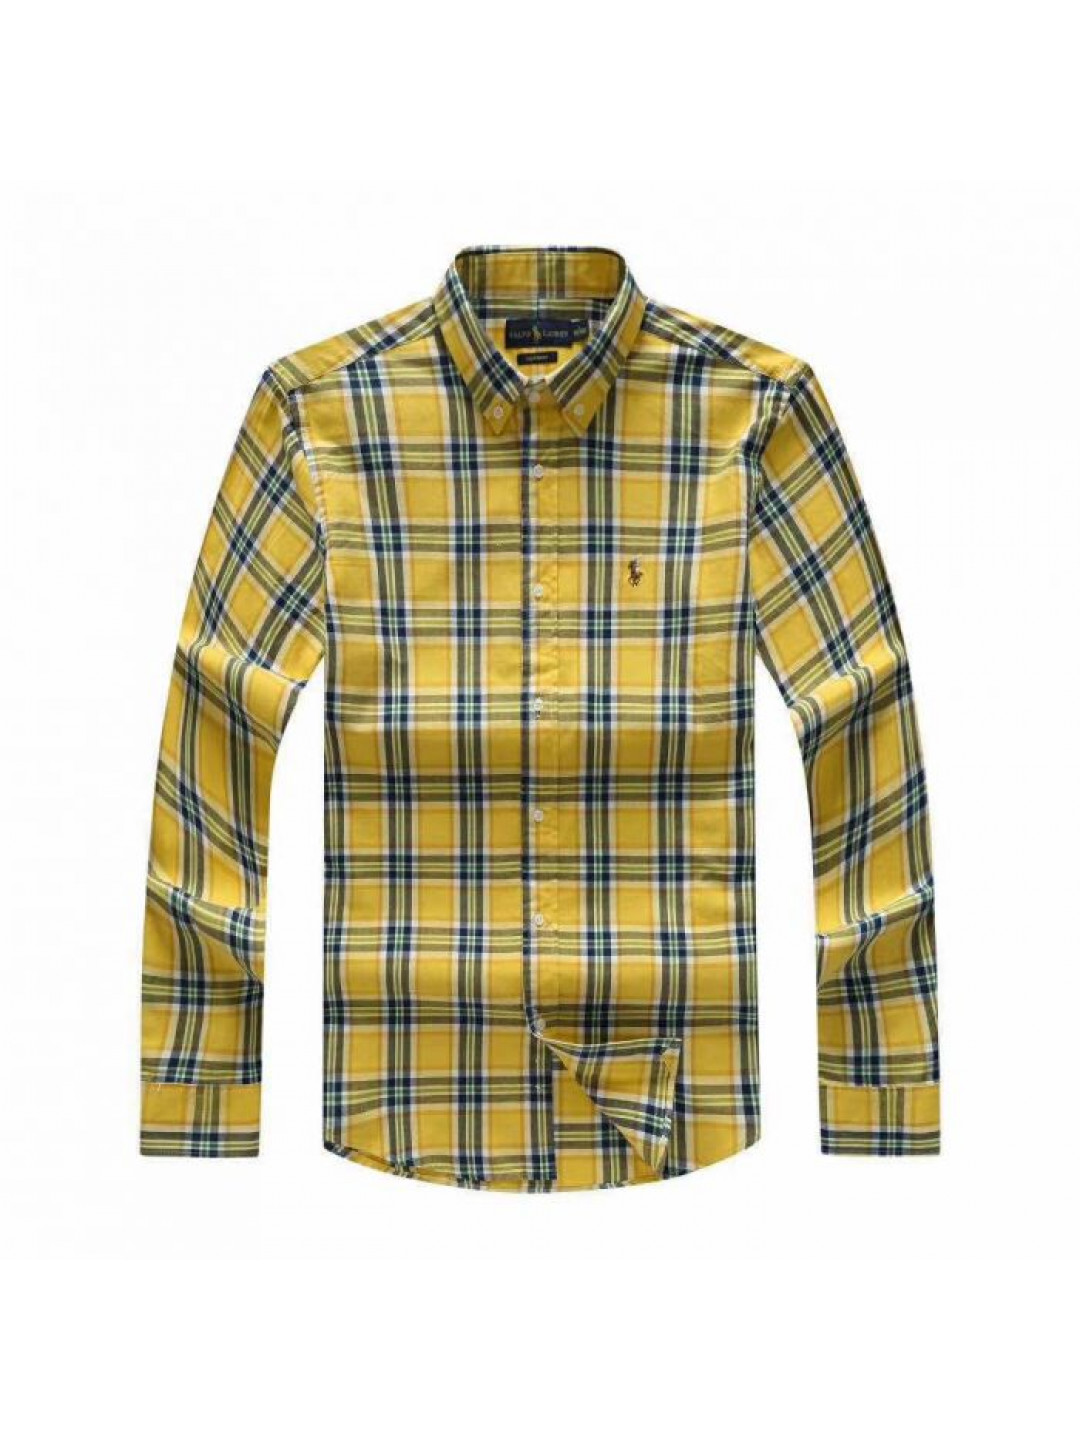 Shop Online for our latest 2023 Polo Ralph Lauren Men's Checkered Long ...